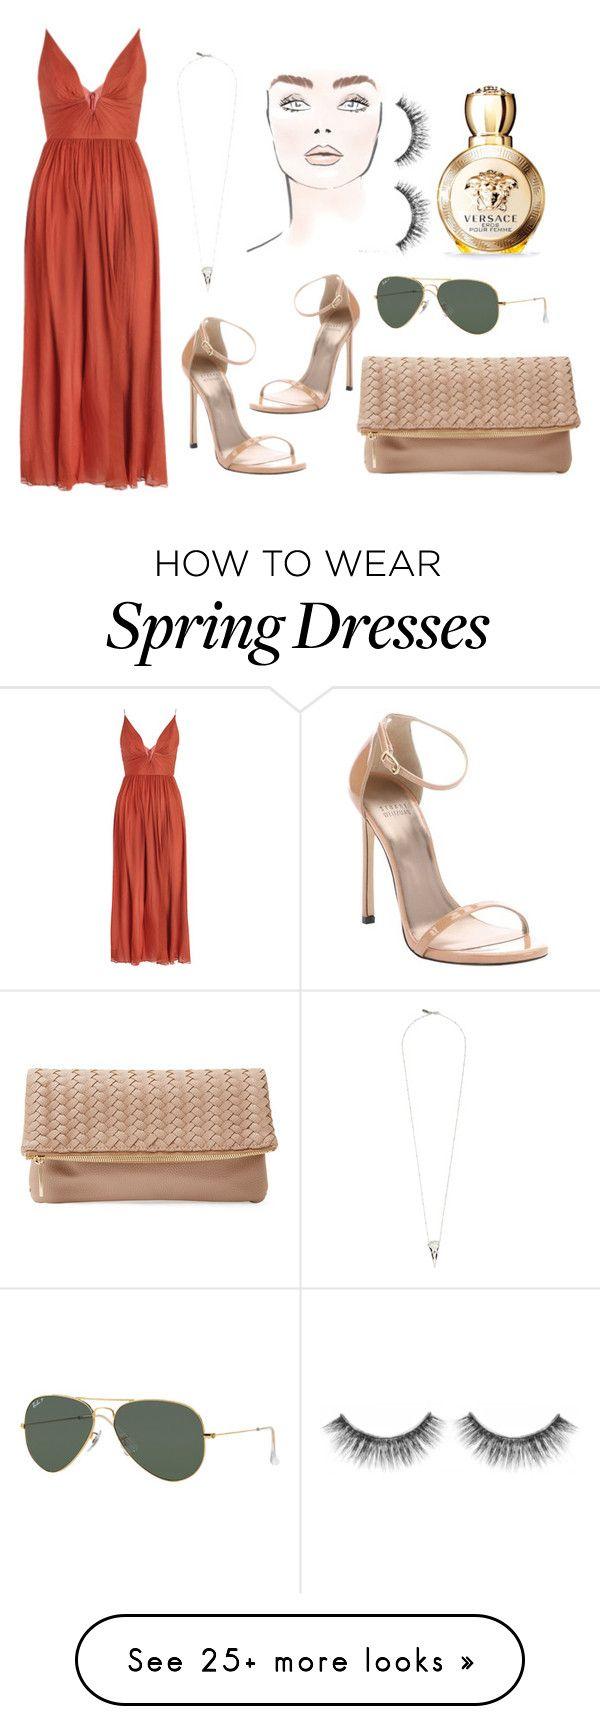 Wedding - Spring Dress Outfits